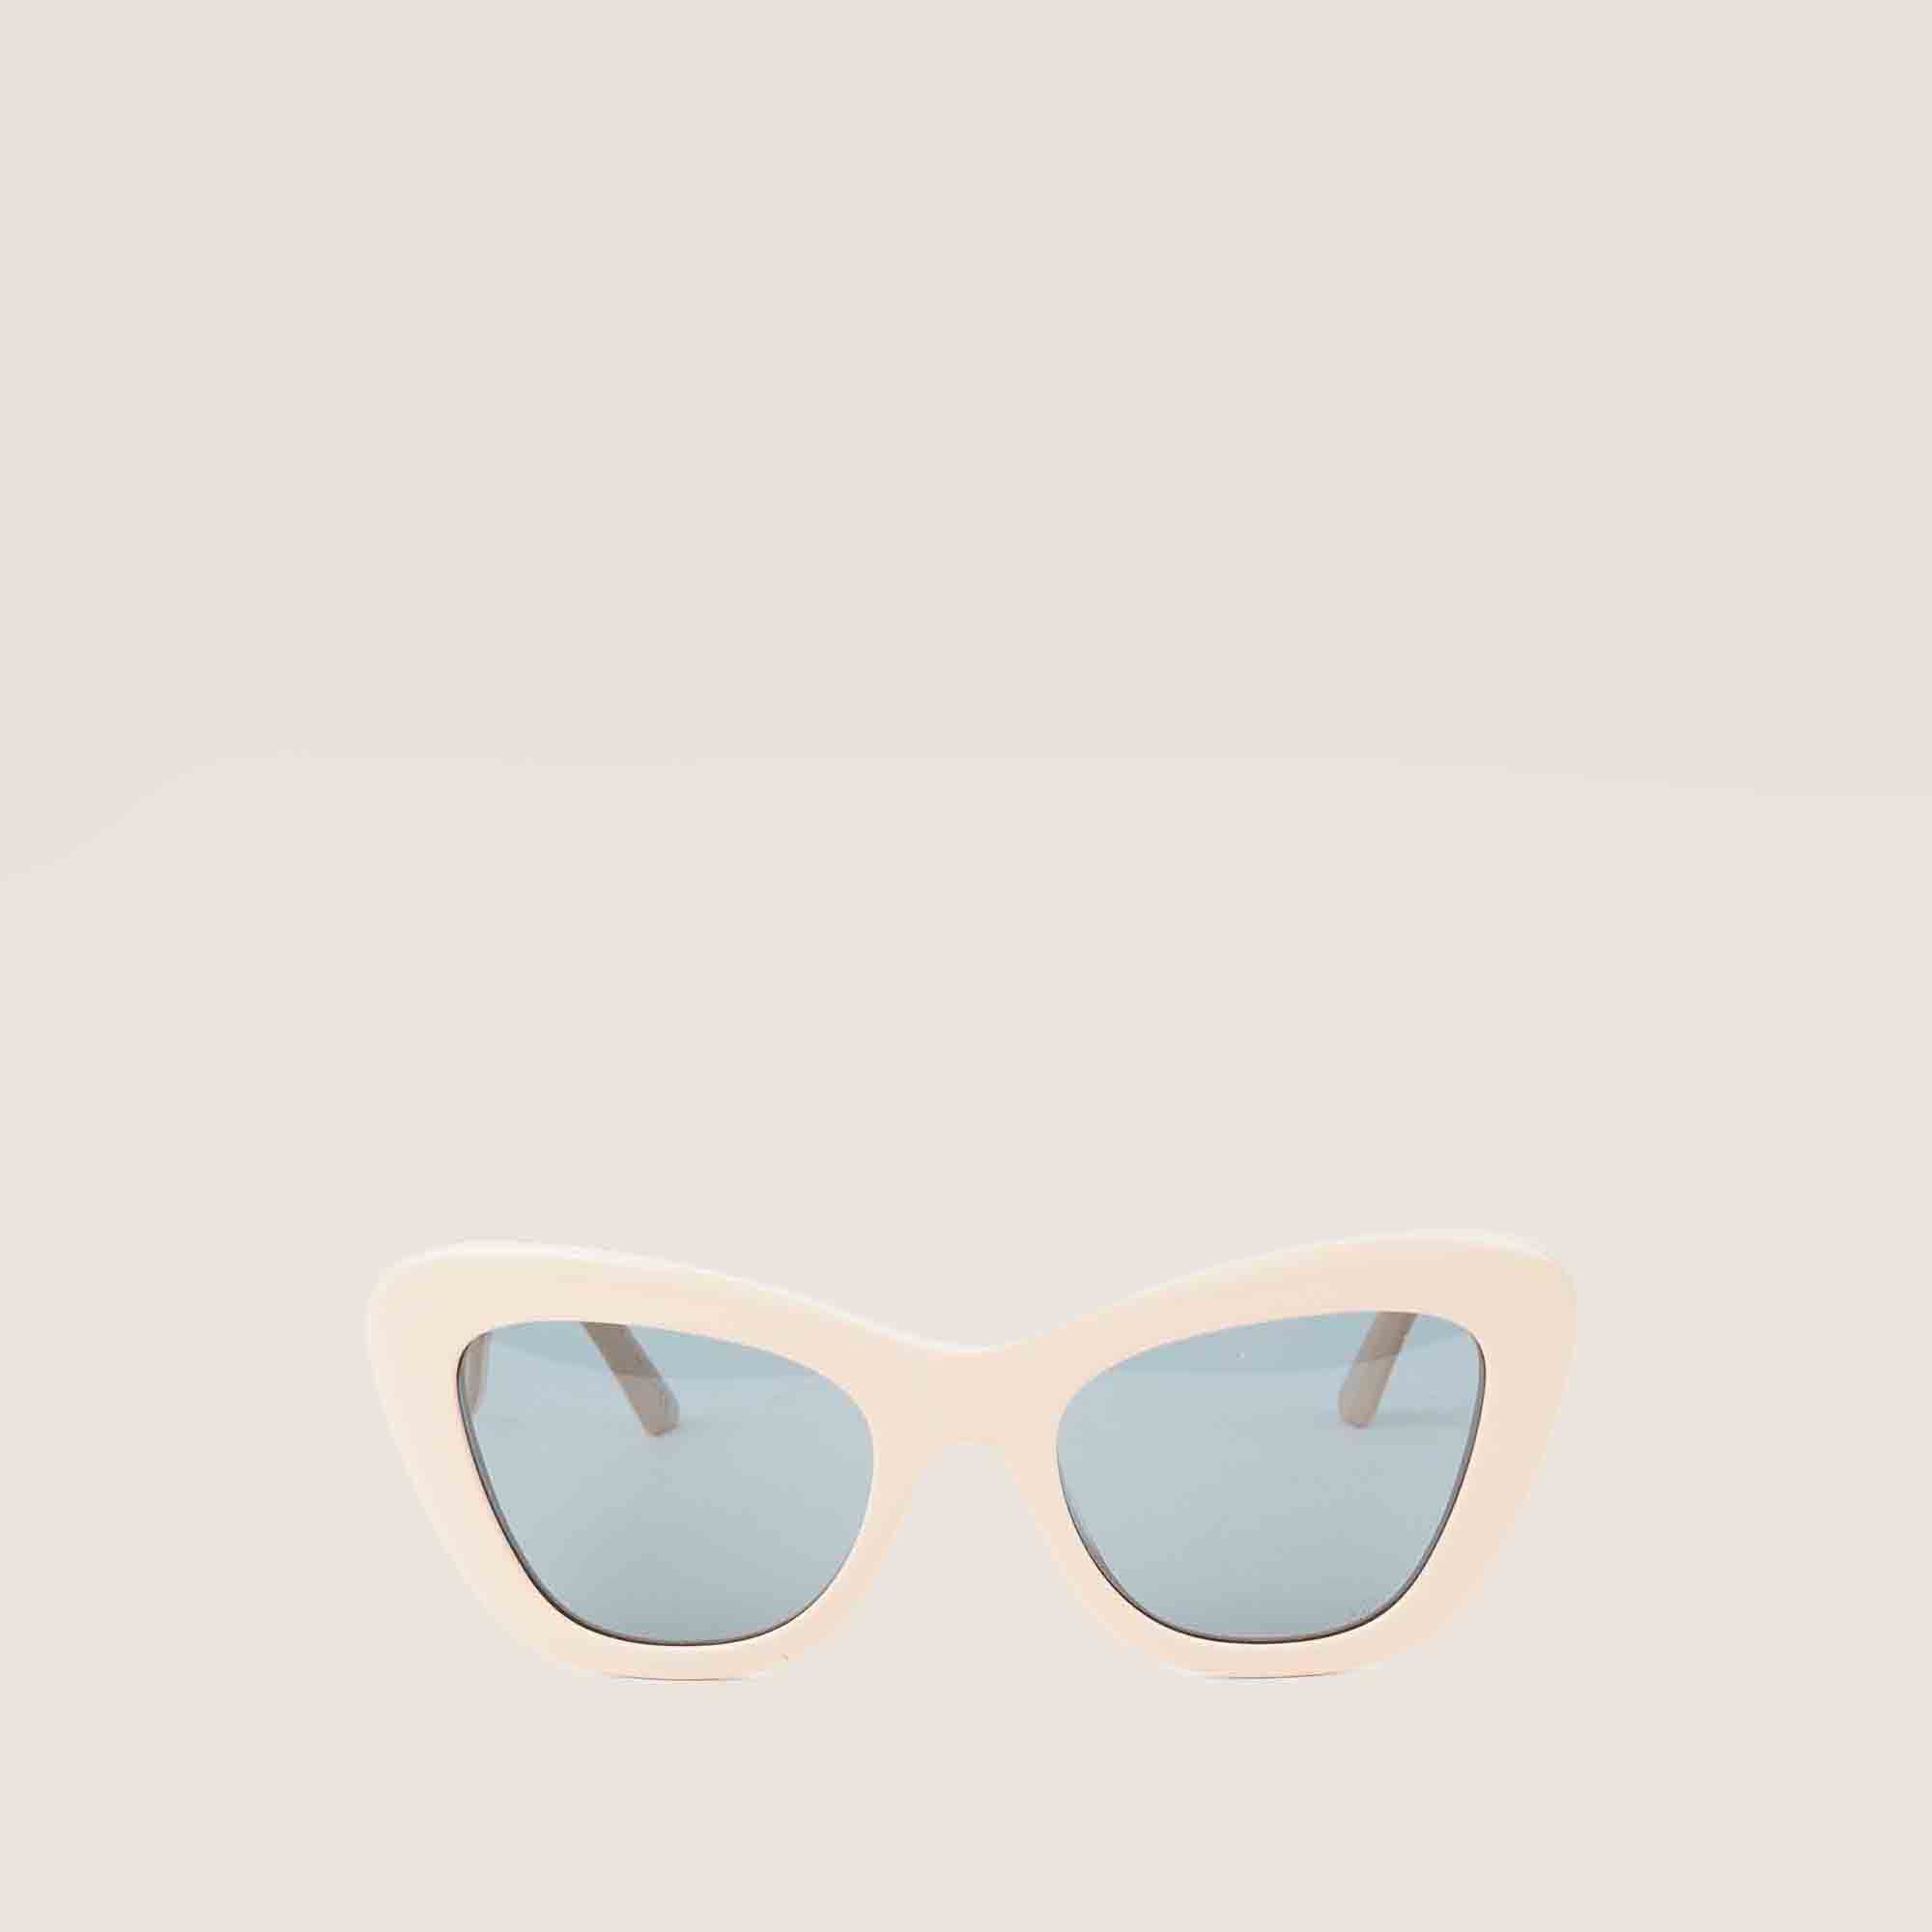 Dior Bobby Sunglasses - CHRISTIAN DIOR - Affordable Luxury image